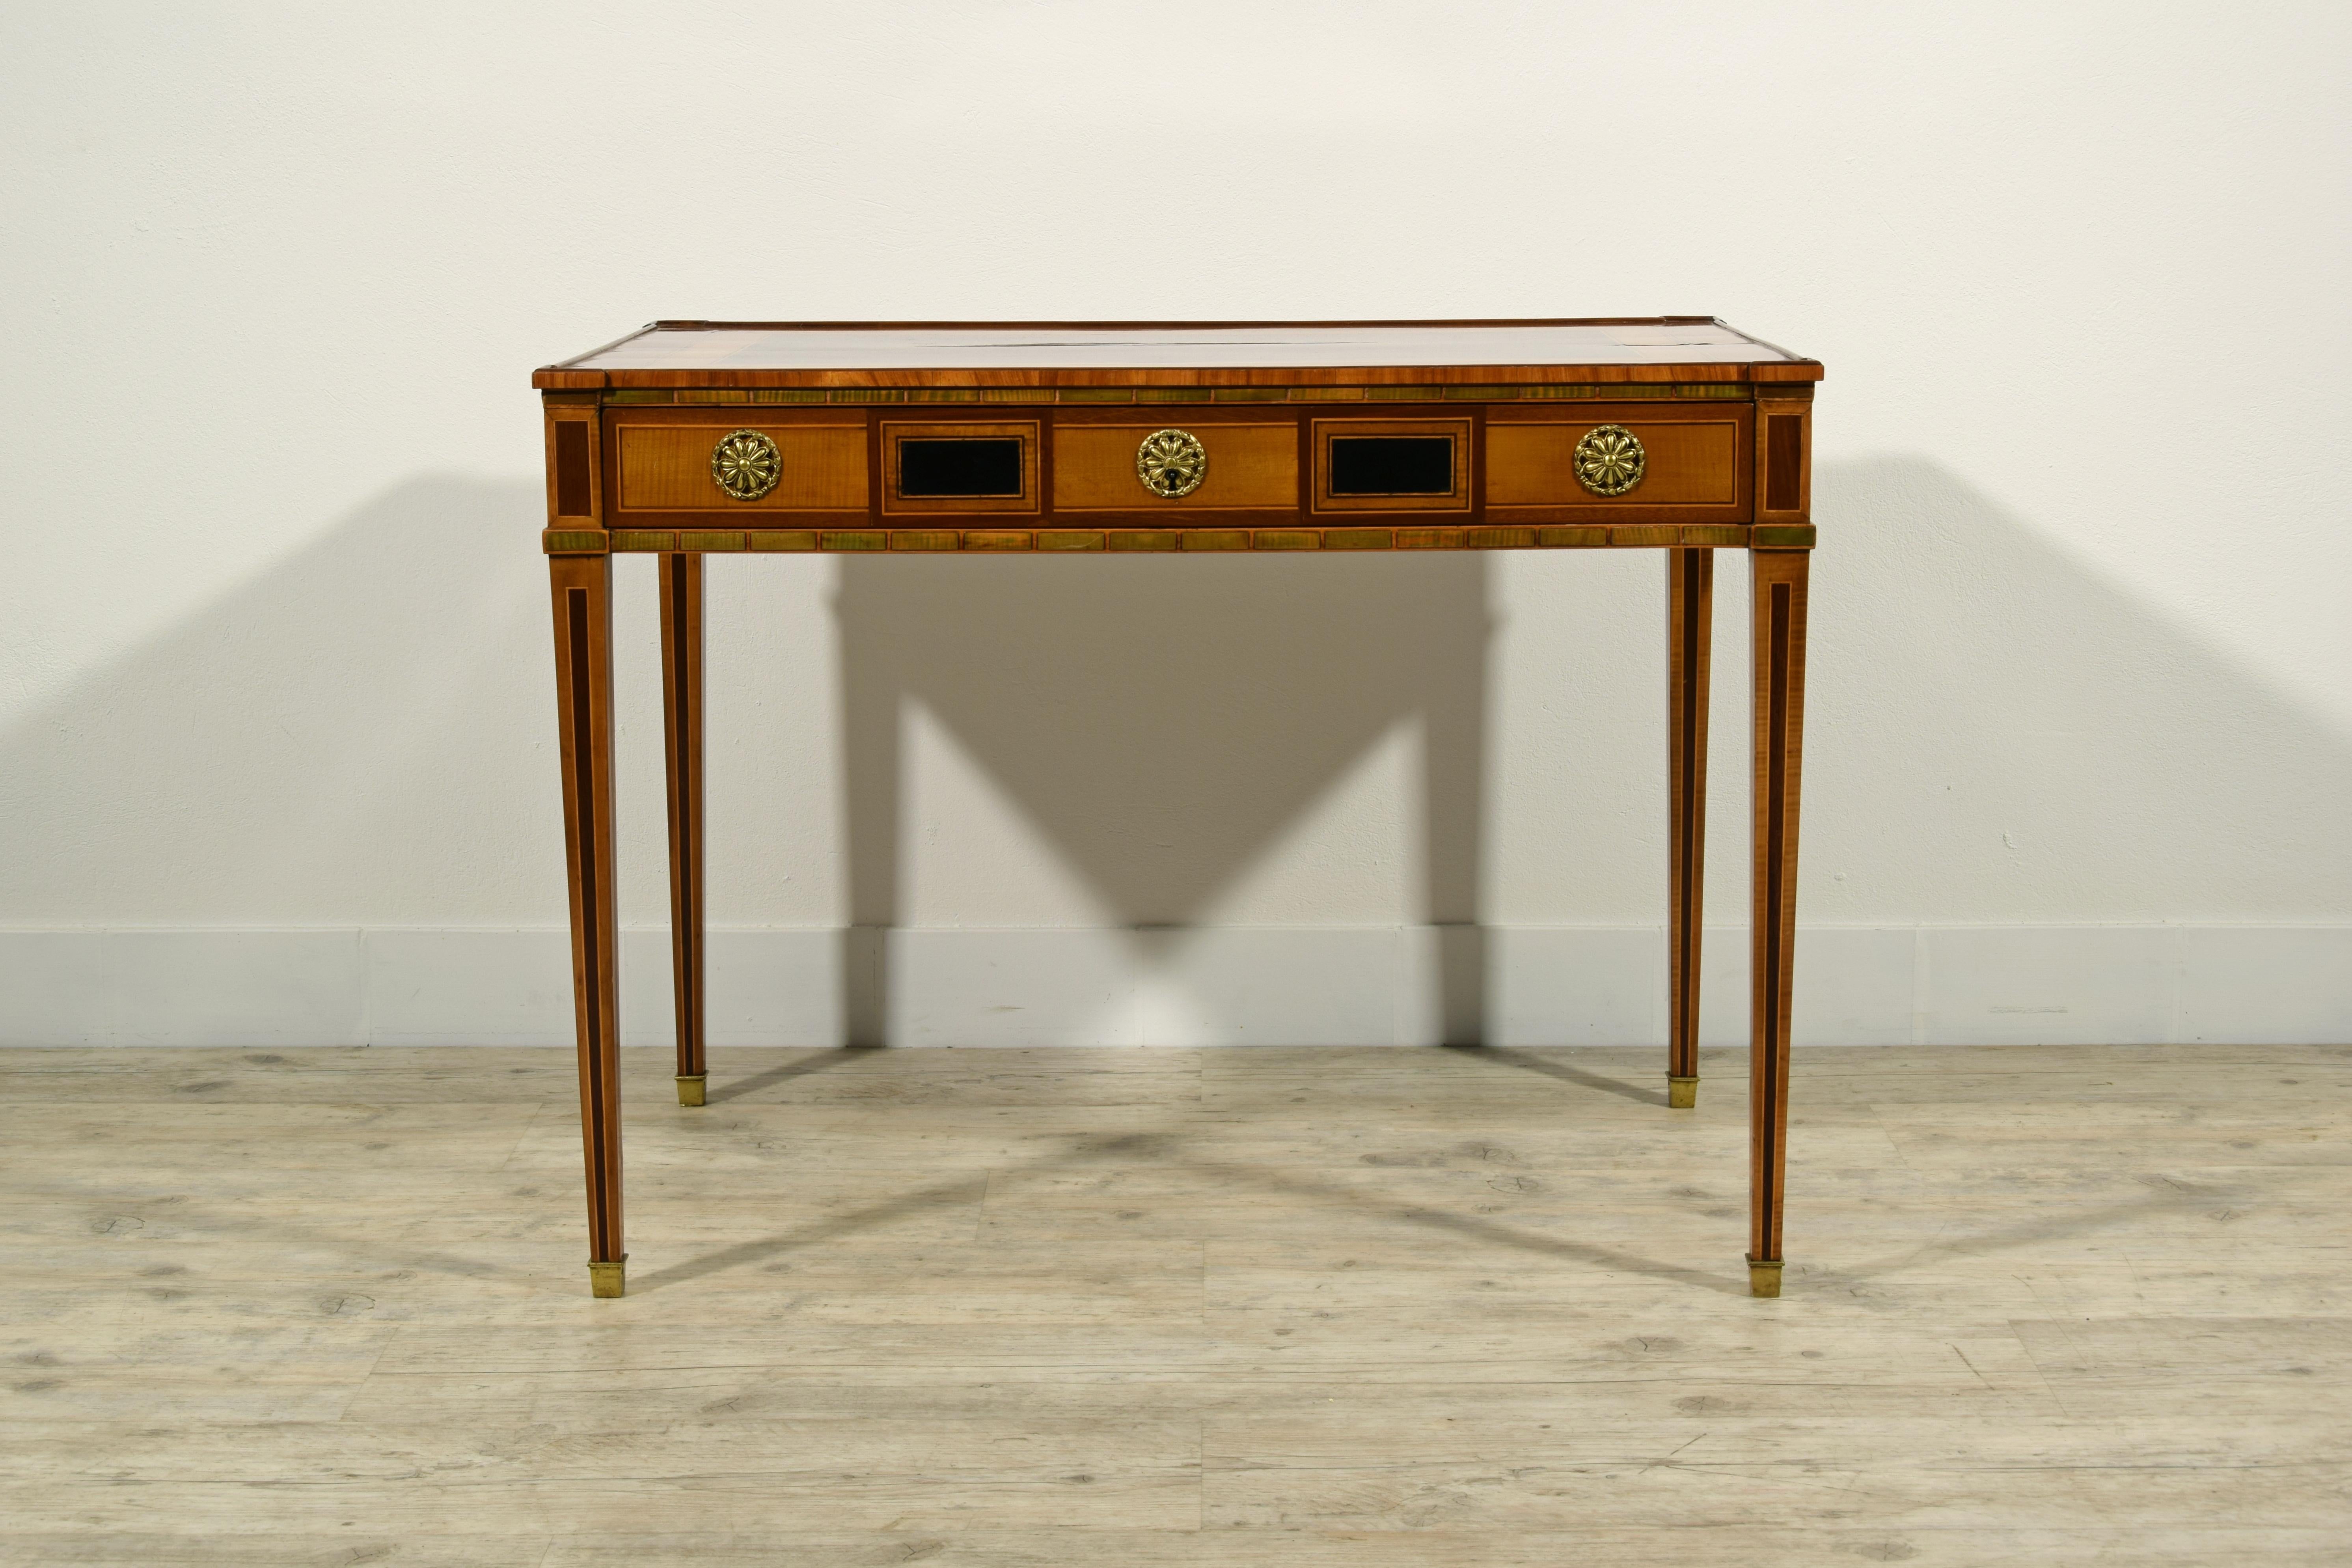 18th century, French wood centre desk
Measurements: cm W 95 x D 63,5 x H 71,5 (maximum leg H 57,5)

The elegant centre desk was built in northern France in the late 18th century. The wooden structure is finely veneered with exotic wooden